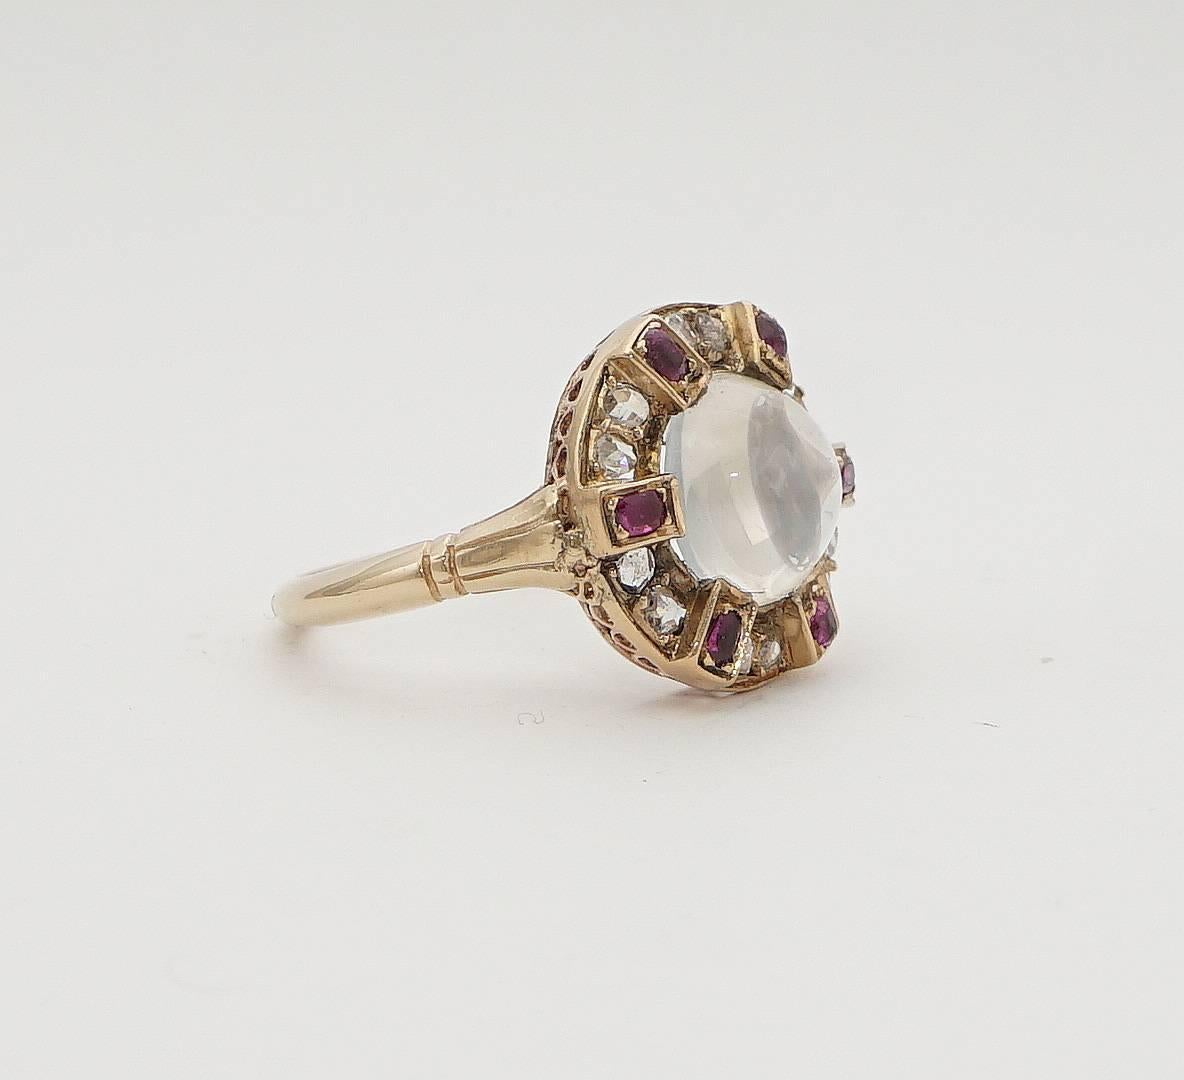 Beacon Hill Jewelers Presents:

A victorian period moonstone, diamond, and ruby ring in luxurious 18 karat yellow gold.  Centered by a beautiful and high quality cabochon cut moonstone this one of a kind ring features a surrounding halo of